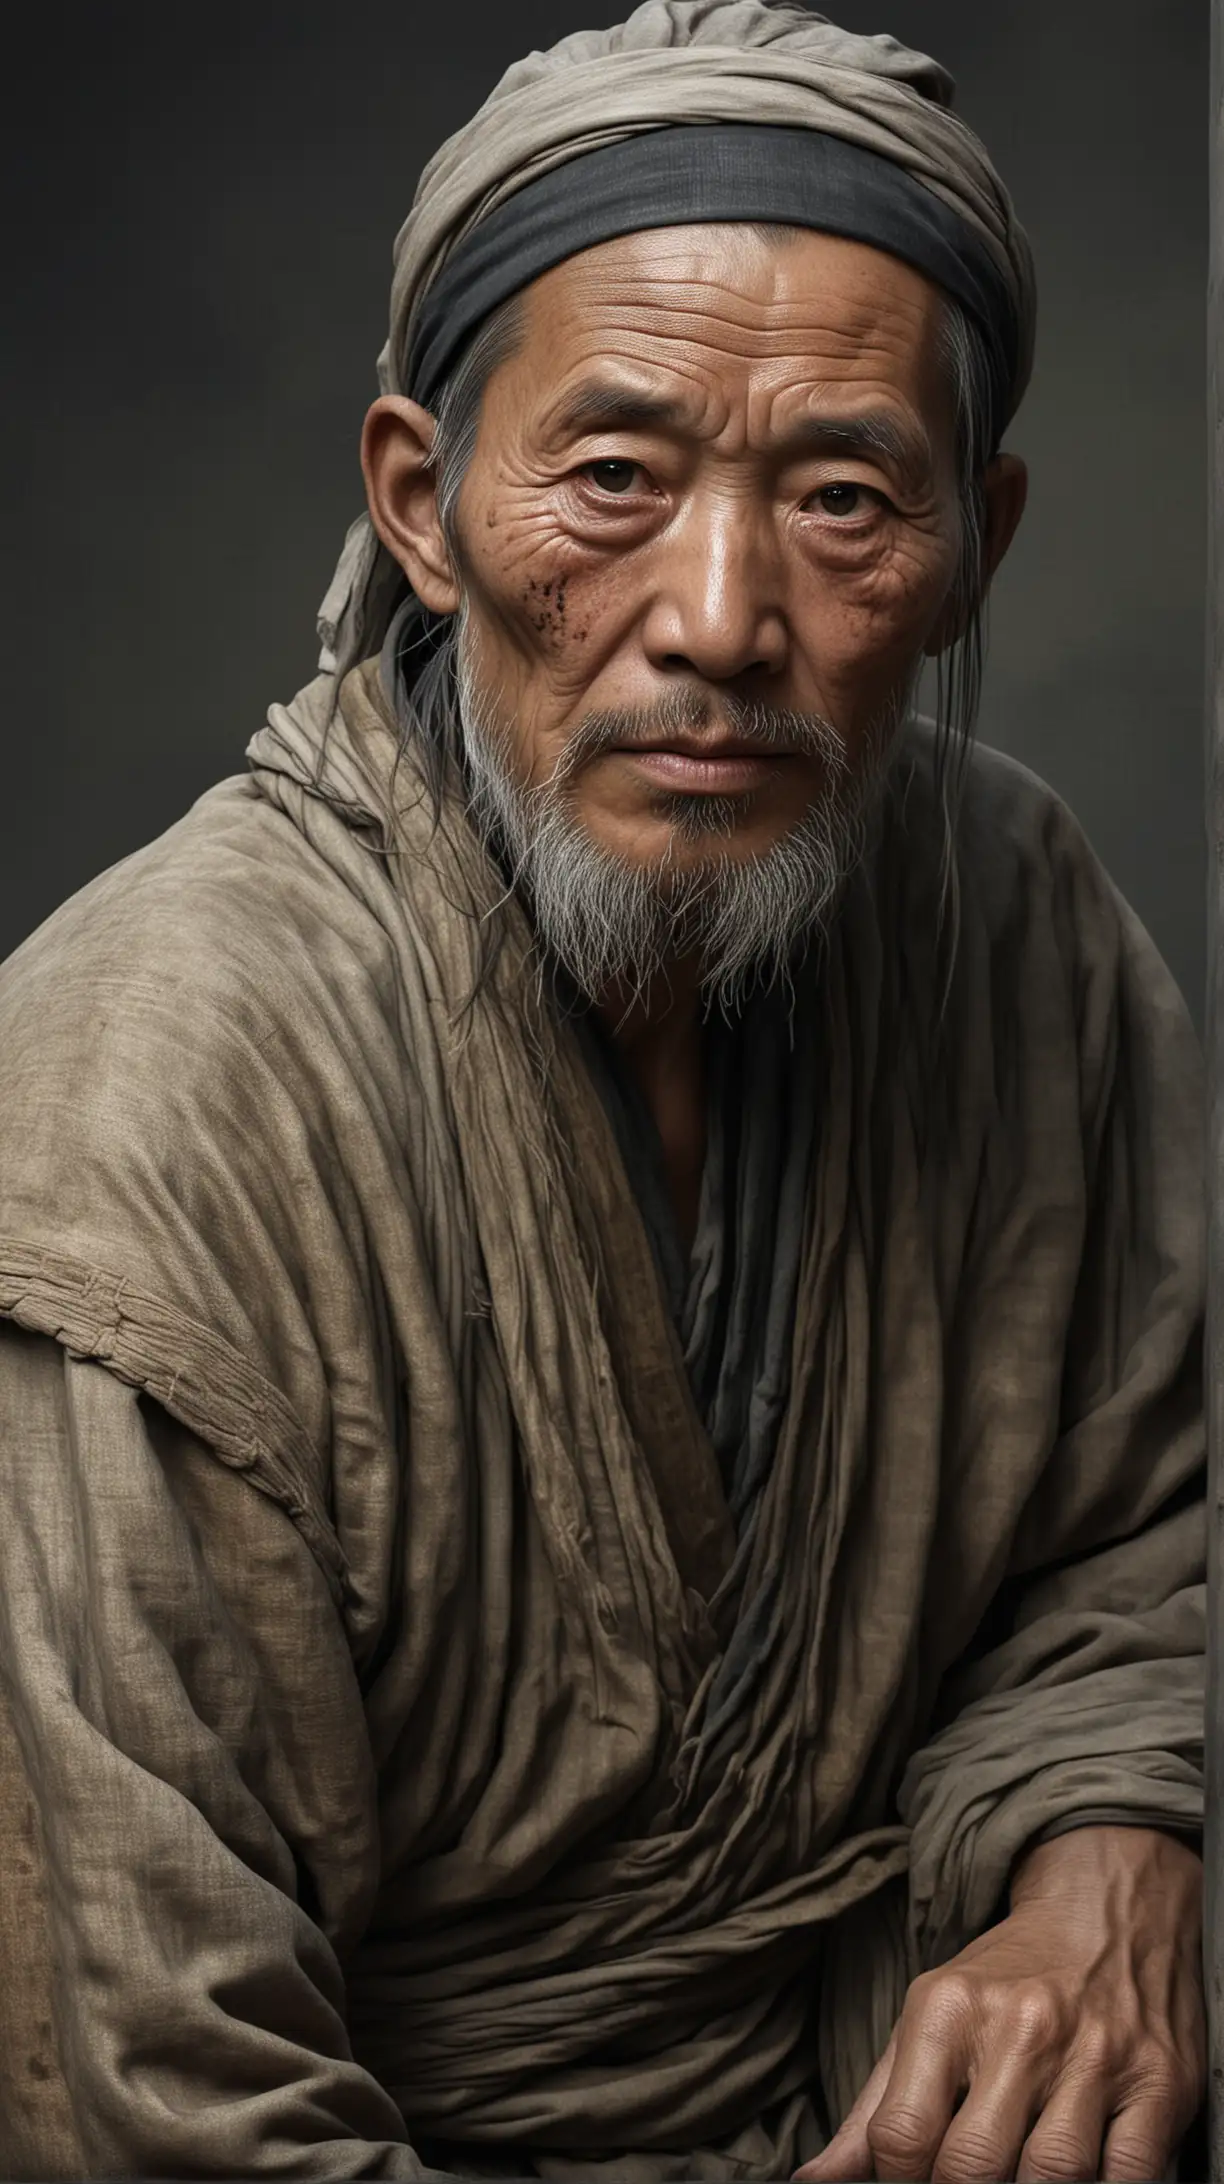 Hyper Realistic Portrait of an Ancient Chinese Poor Man